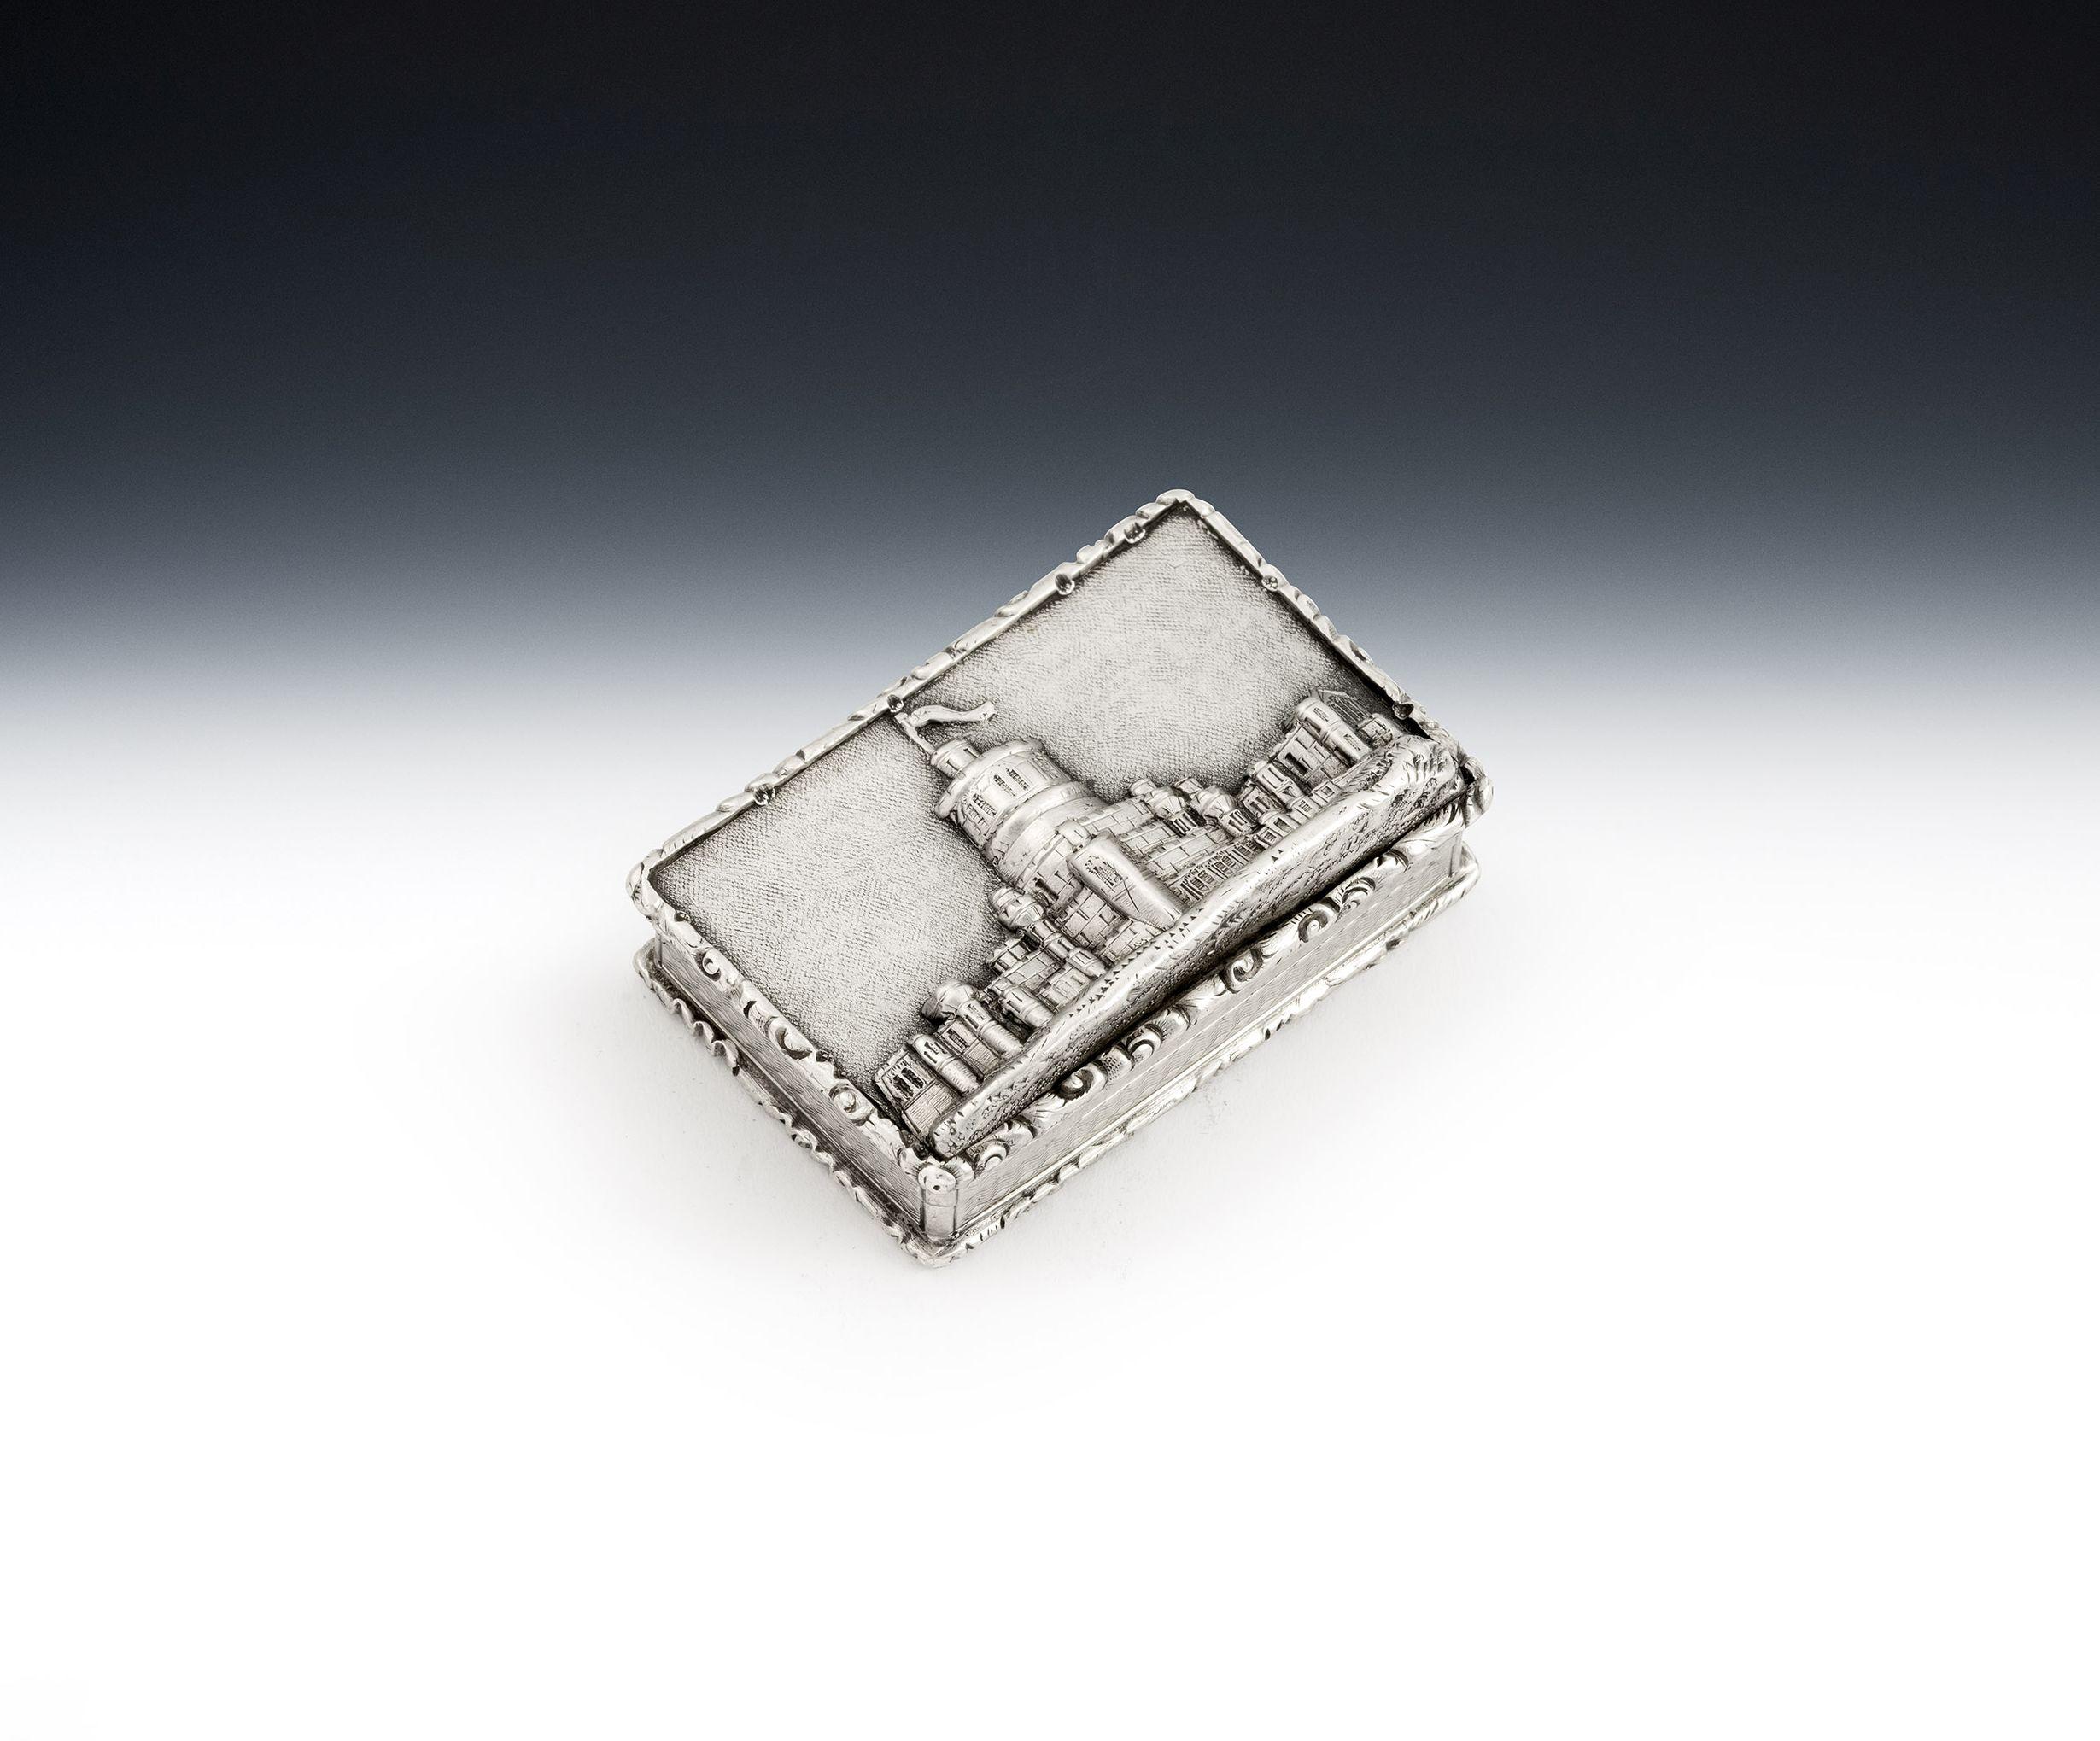 Windsor Castle. An extremely rare Castle Top Vinaigrette made in Birmingham in 1844 by John Tongue.

This very rare Vinaigrette is broad rectangular in form and both the sides and base are decorated with engine turned engraving, within raised